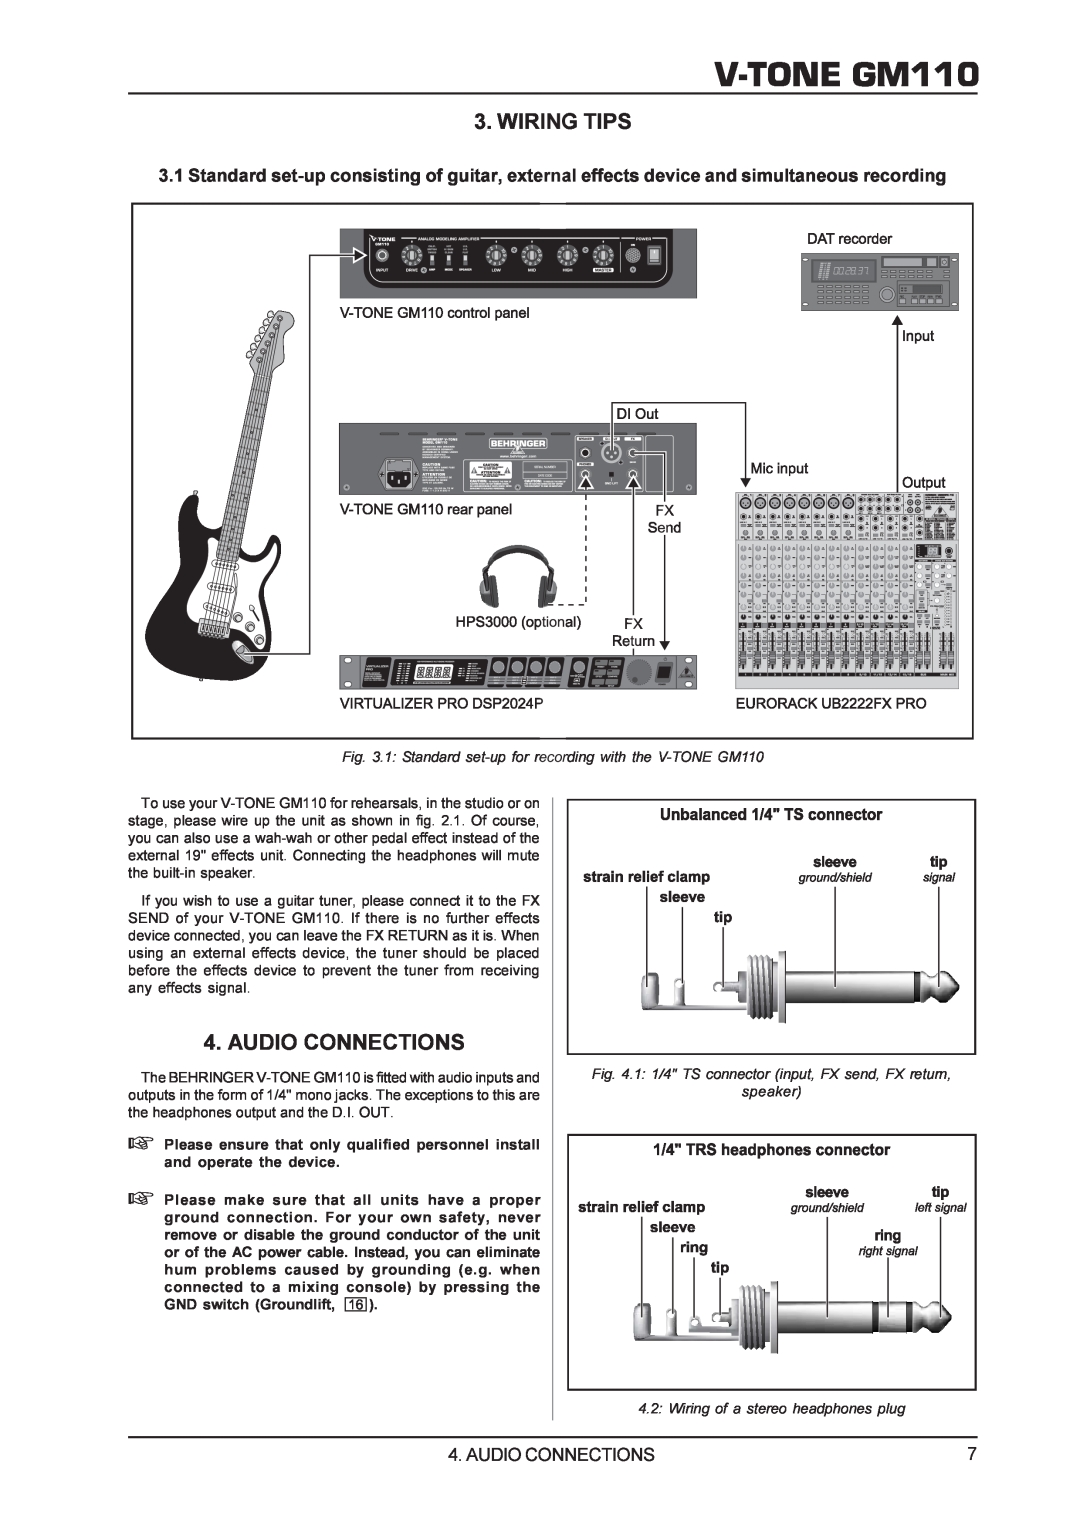 Behringer V-TONEGM110 manual Wiring Tips, Audio Connections 